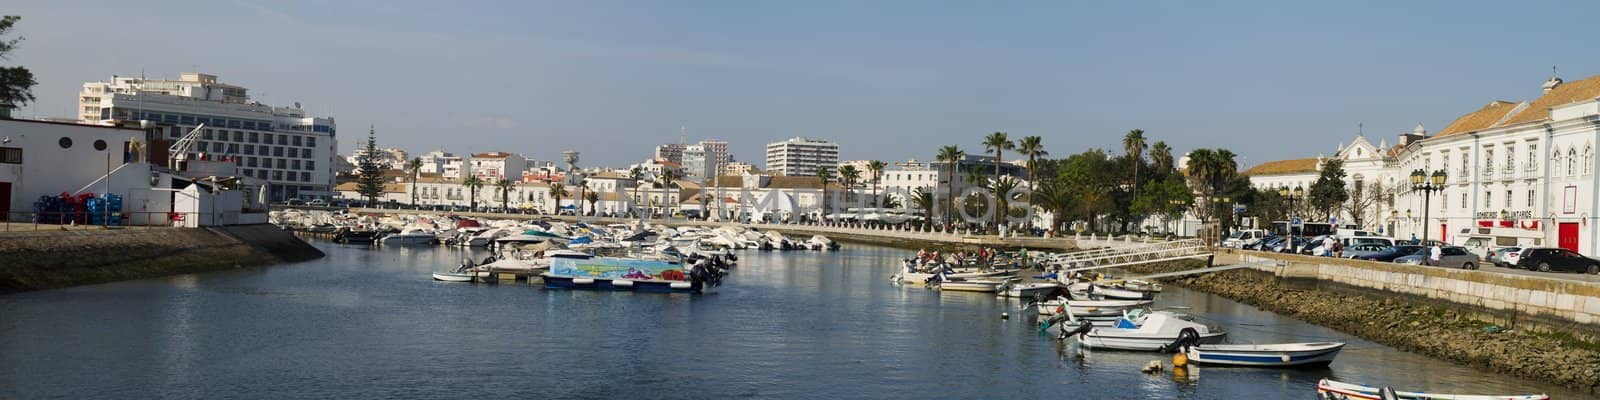 View of the marina with traditional fishing boats on Faro,  Portugal.